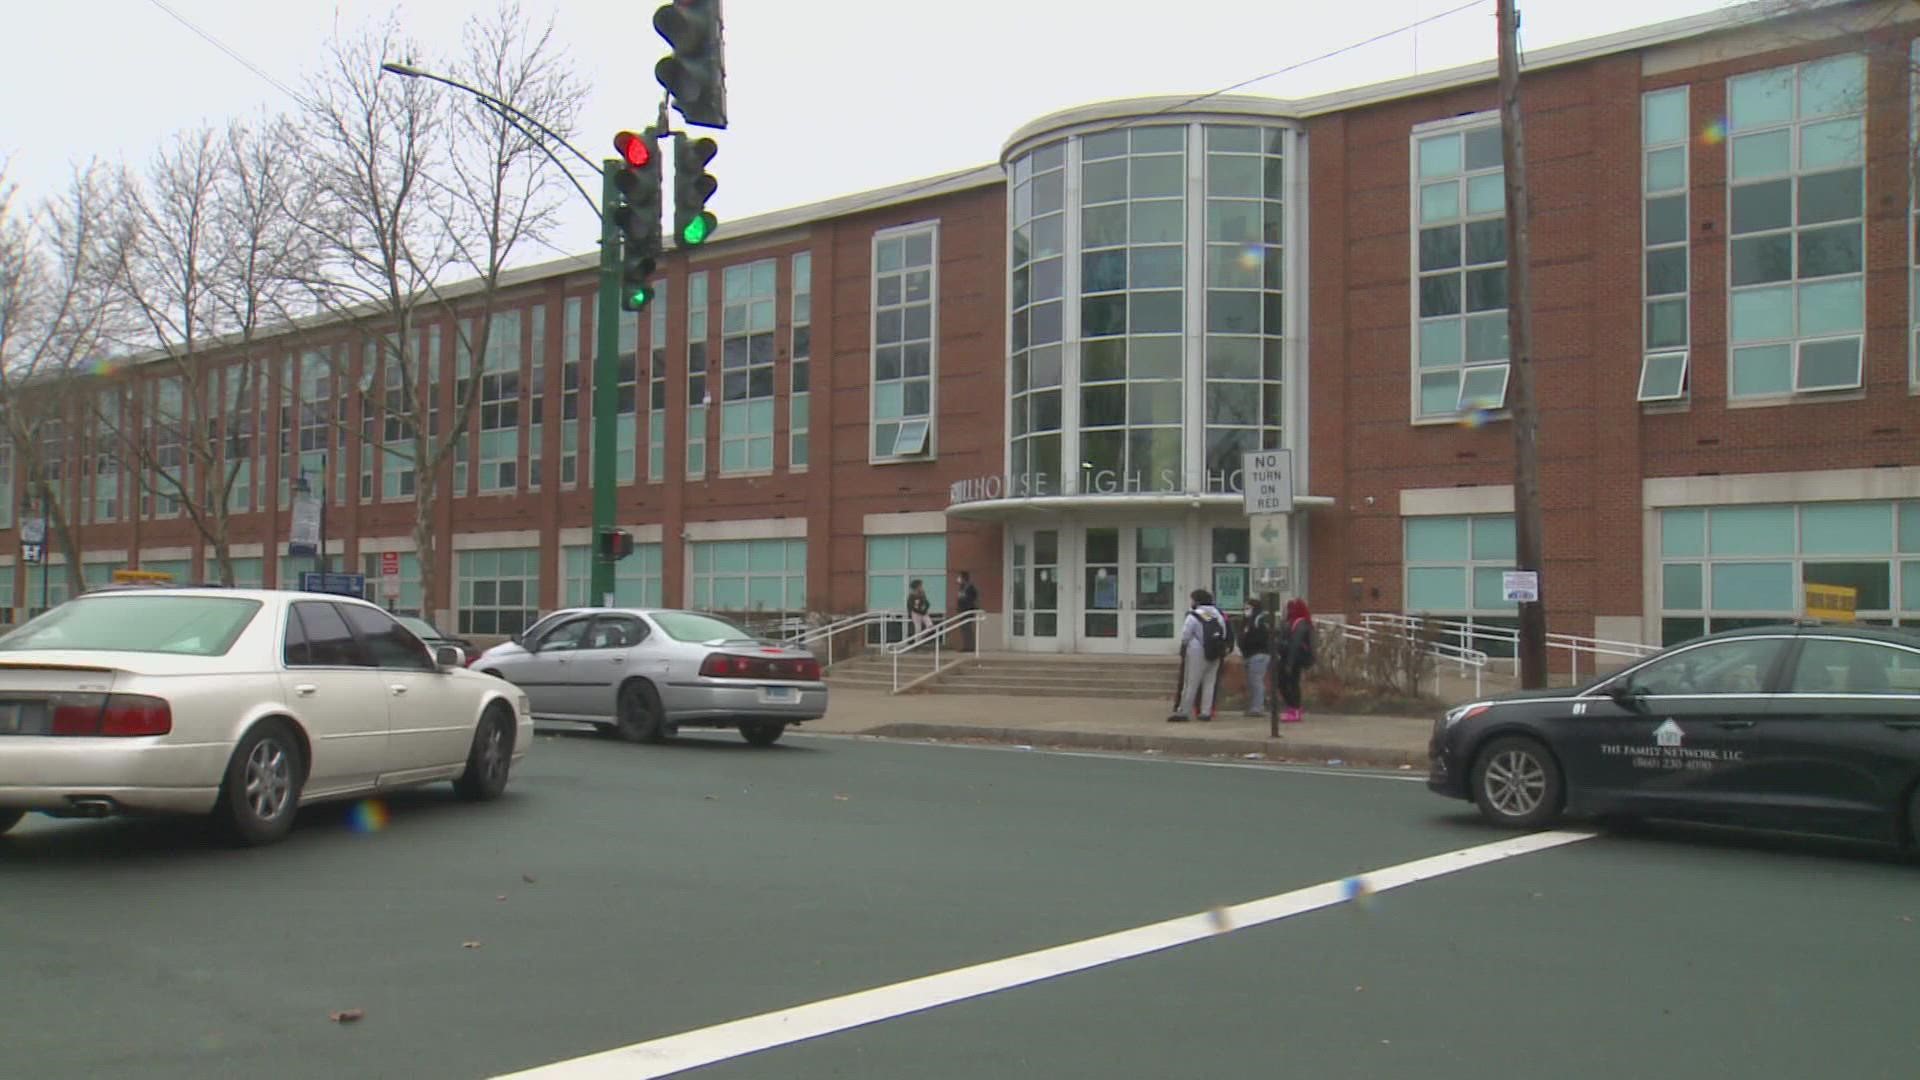 New Haven school officials said the five students ingested a food-like substance that was believed to be infused with an illegal substance